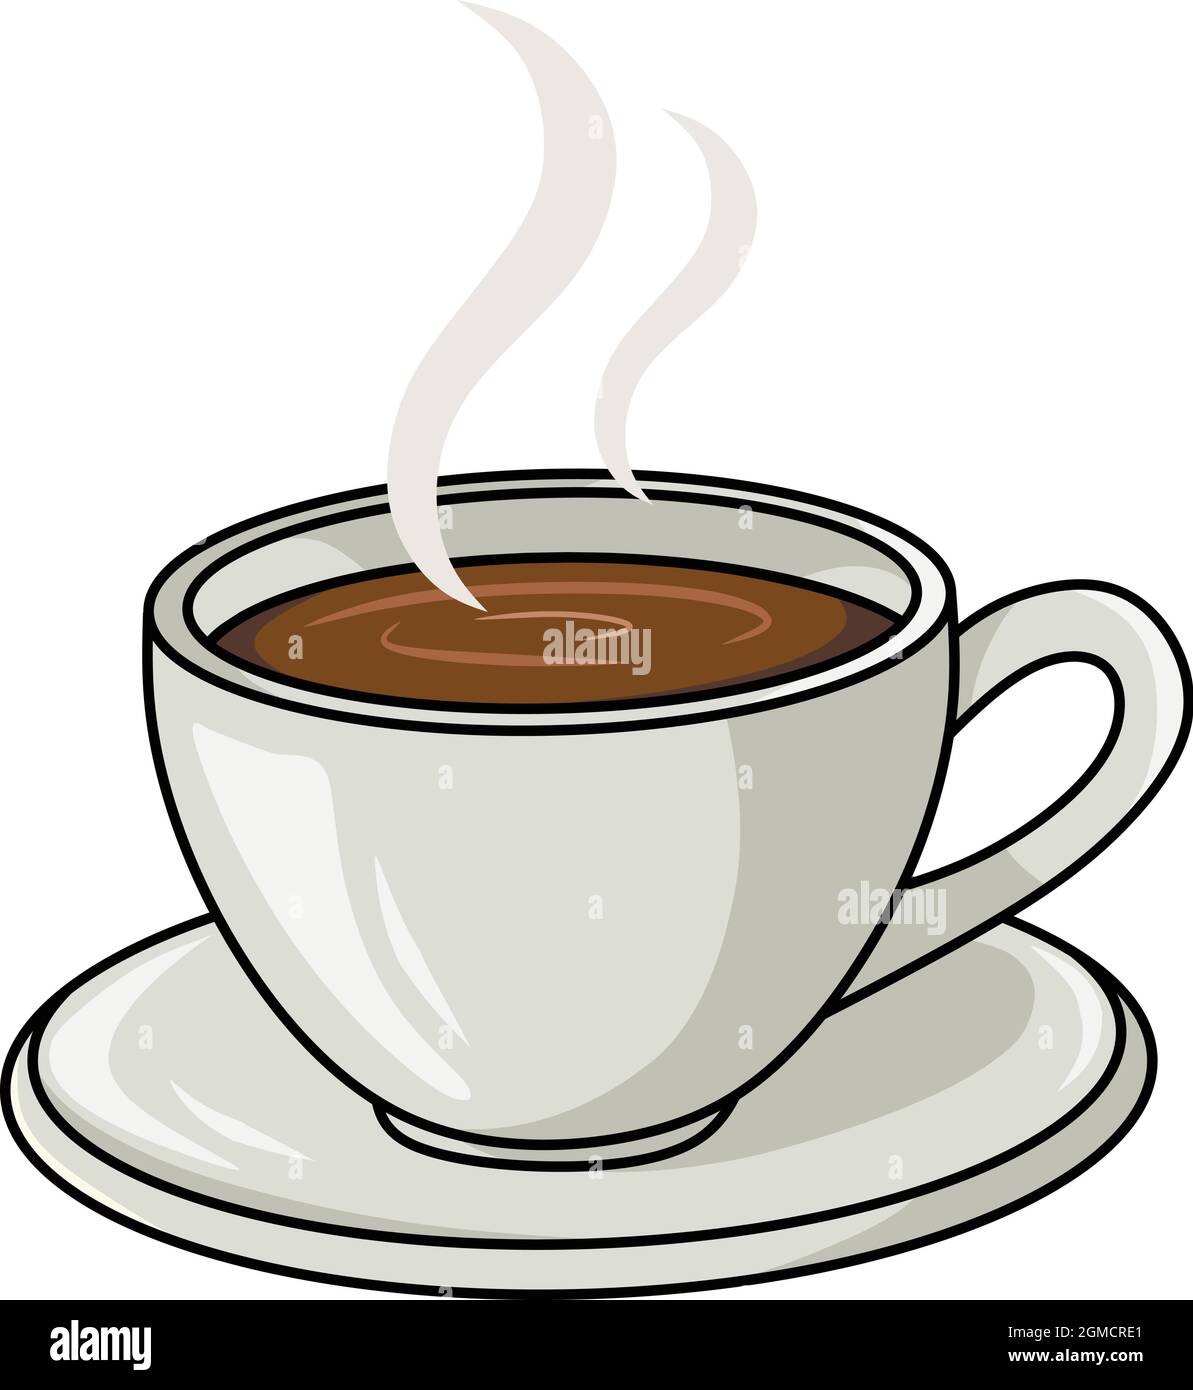 https://c8.alamy.com/comp/2GMCRE1/hot-coffee-cup-vector-illustration-2GMCRE1.jpg